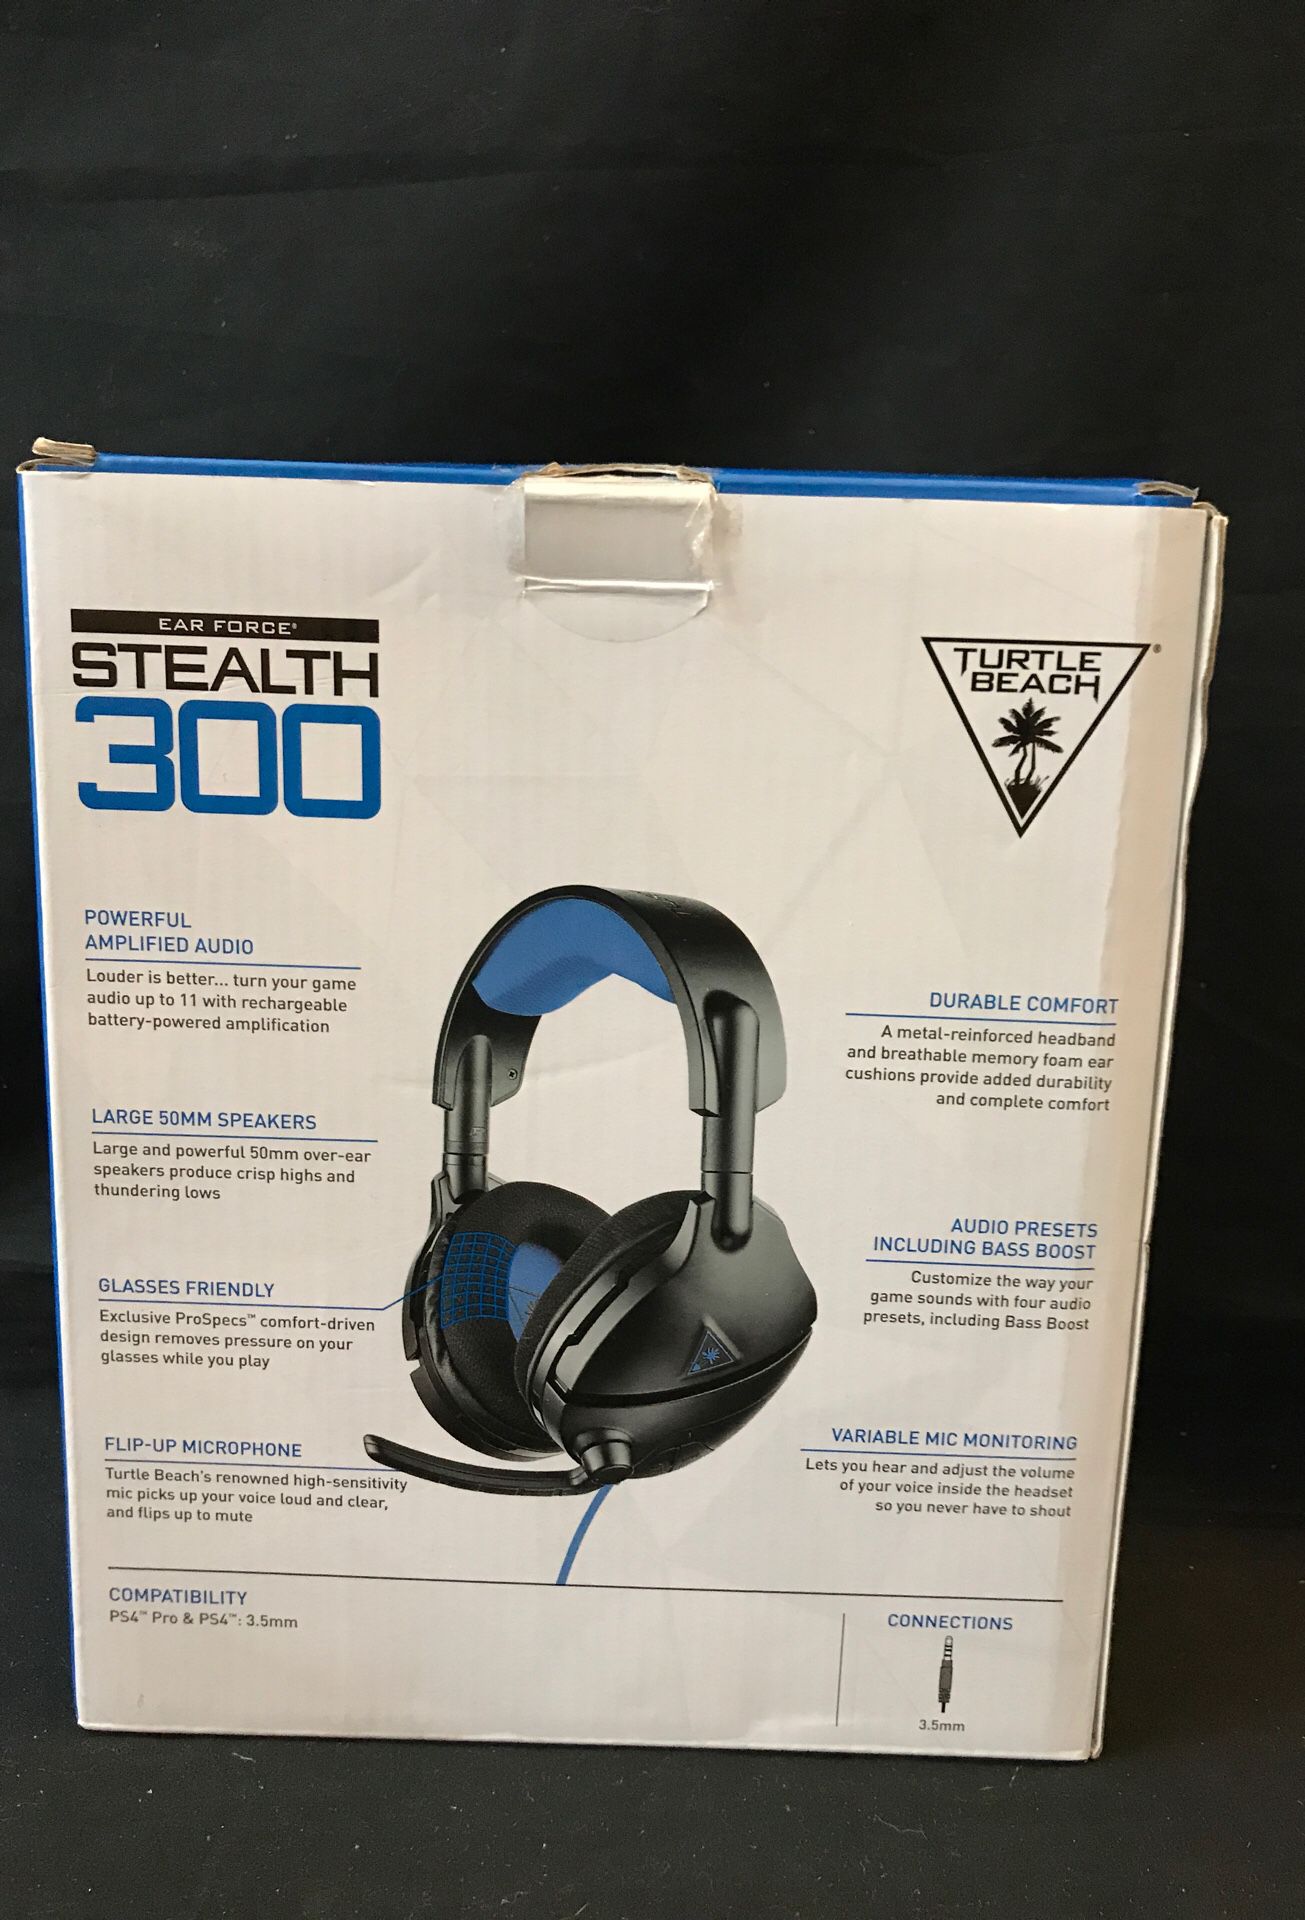 Turtle Beach Stealth 300 Amplified Gaming Headset